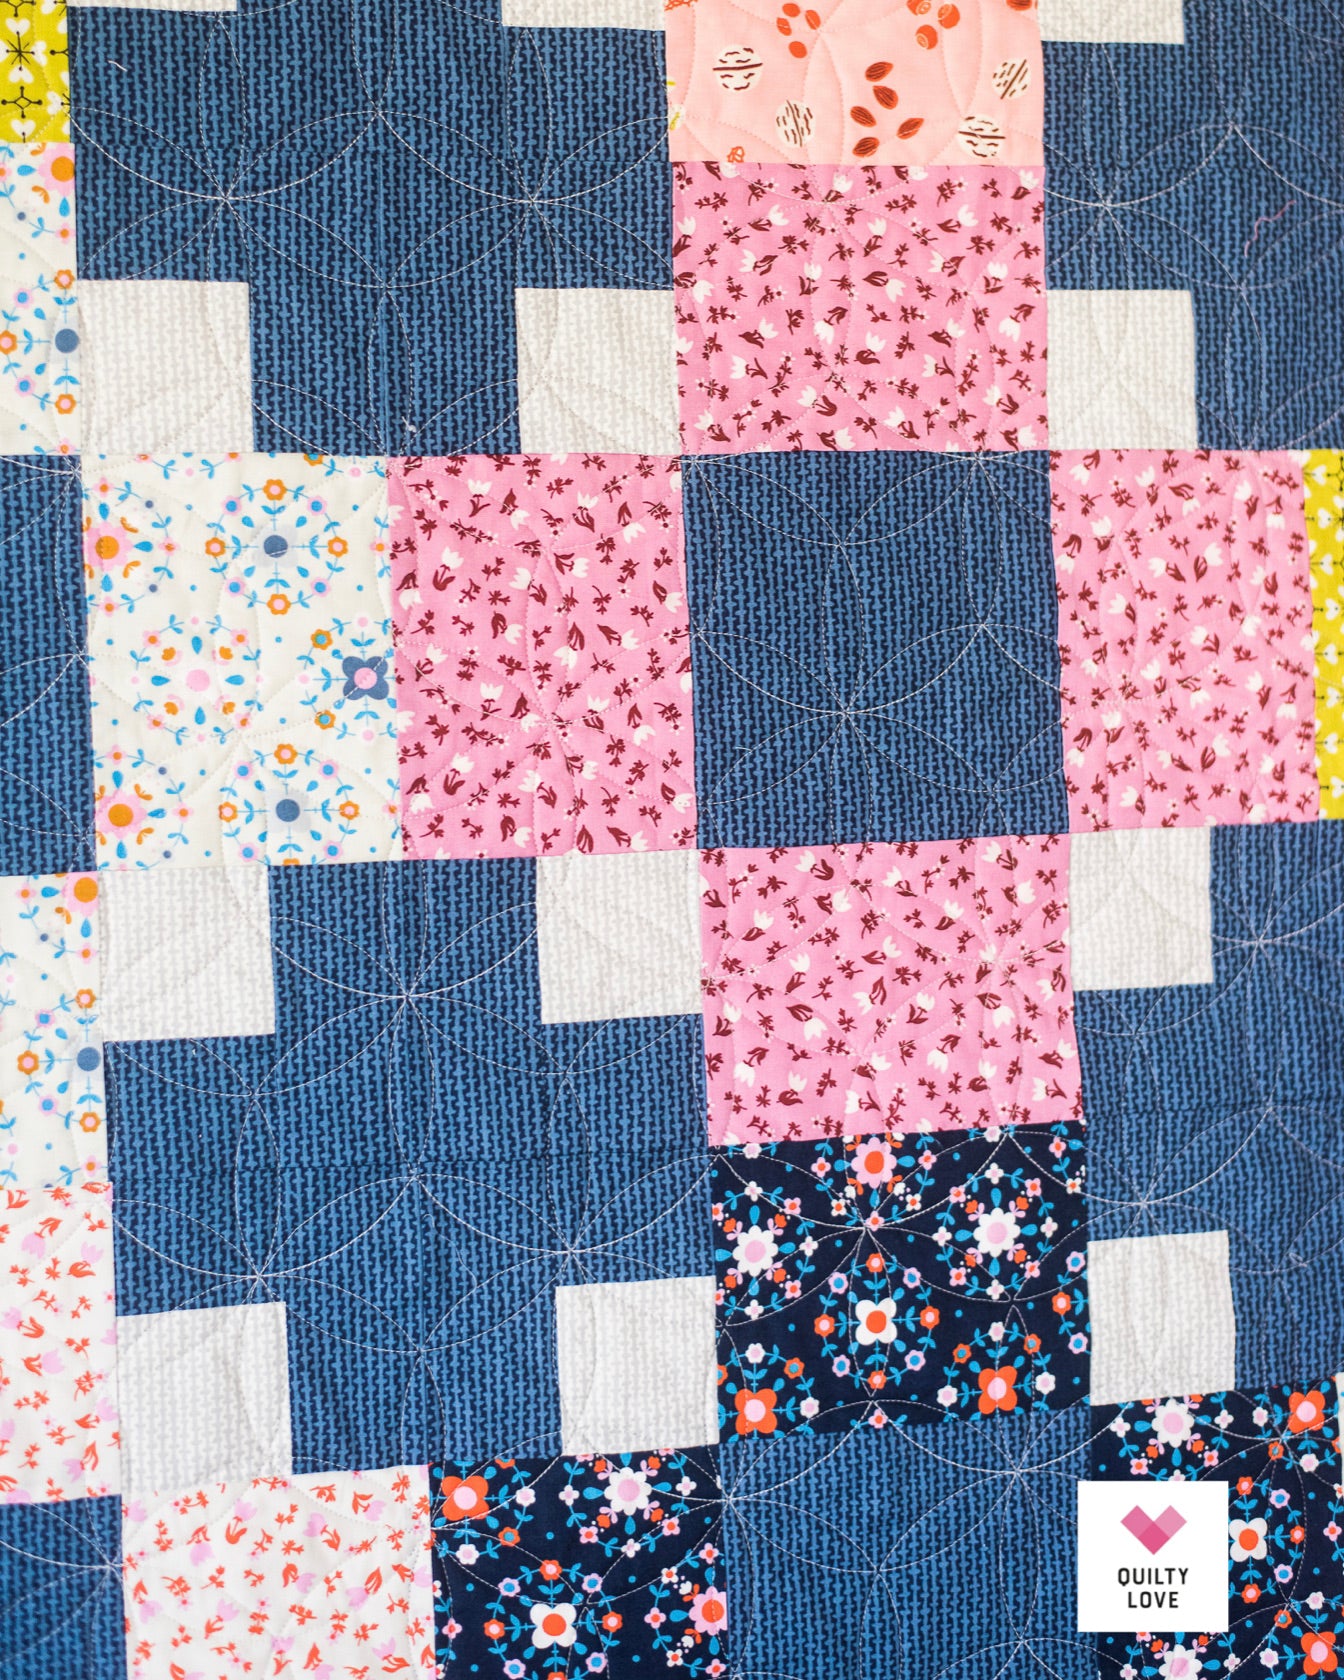 HOPSCOTCH II Quilty Love Pattern Stash Buster Quilt by Emily Dennis #134